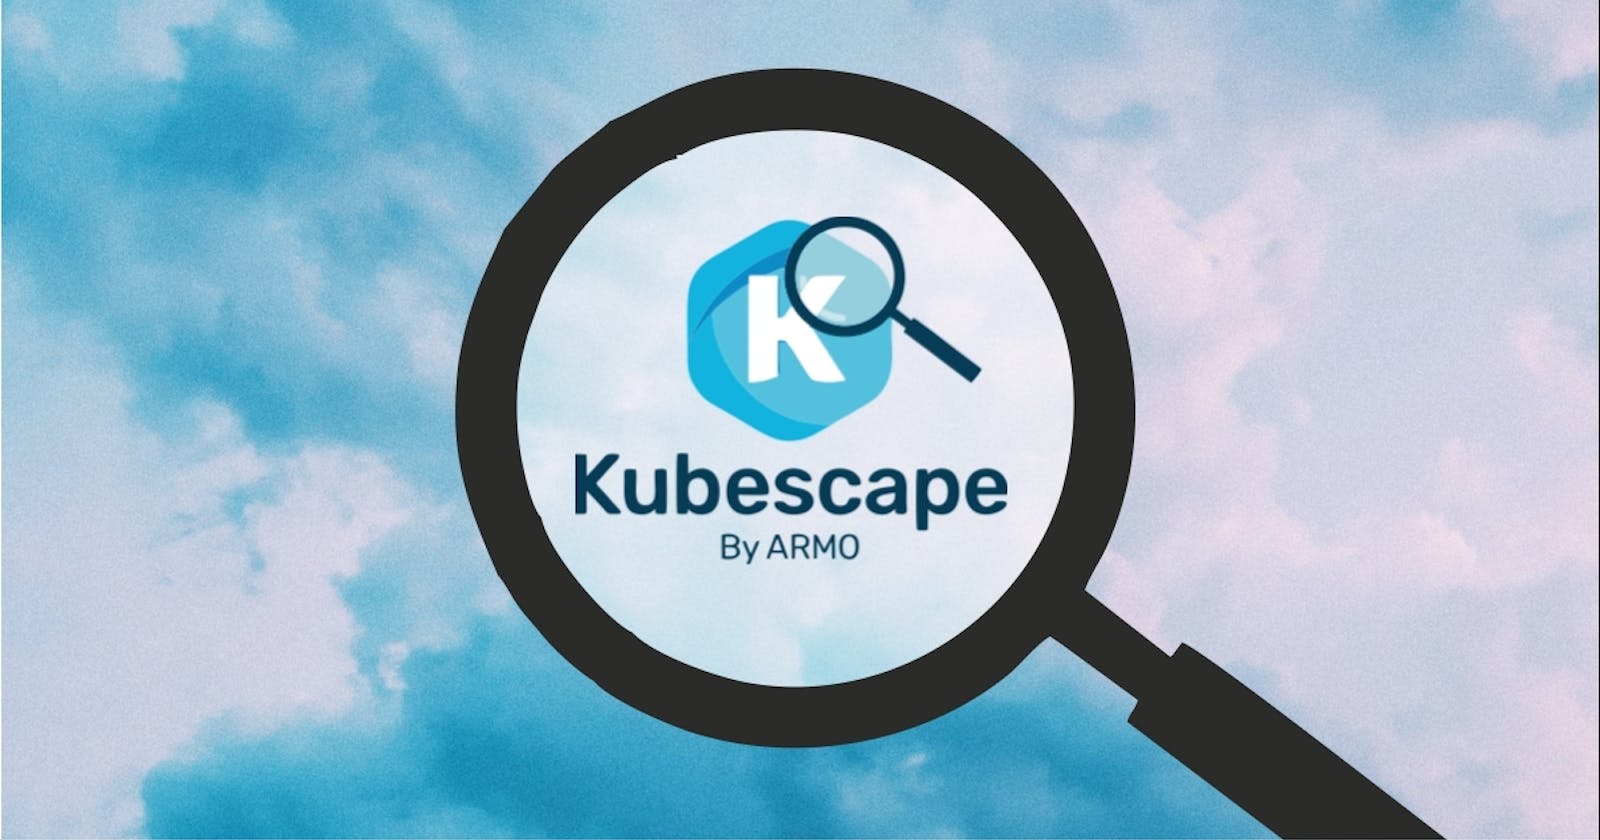 Getting started with kubescape